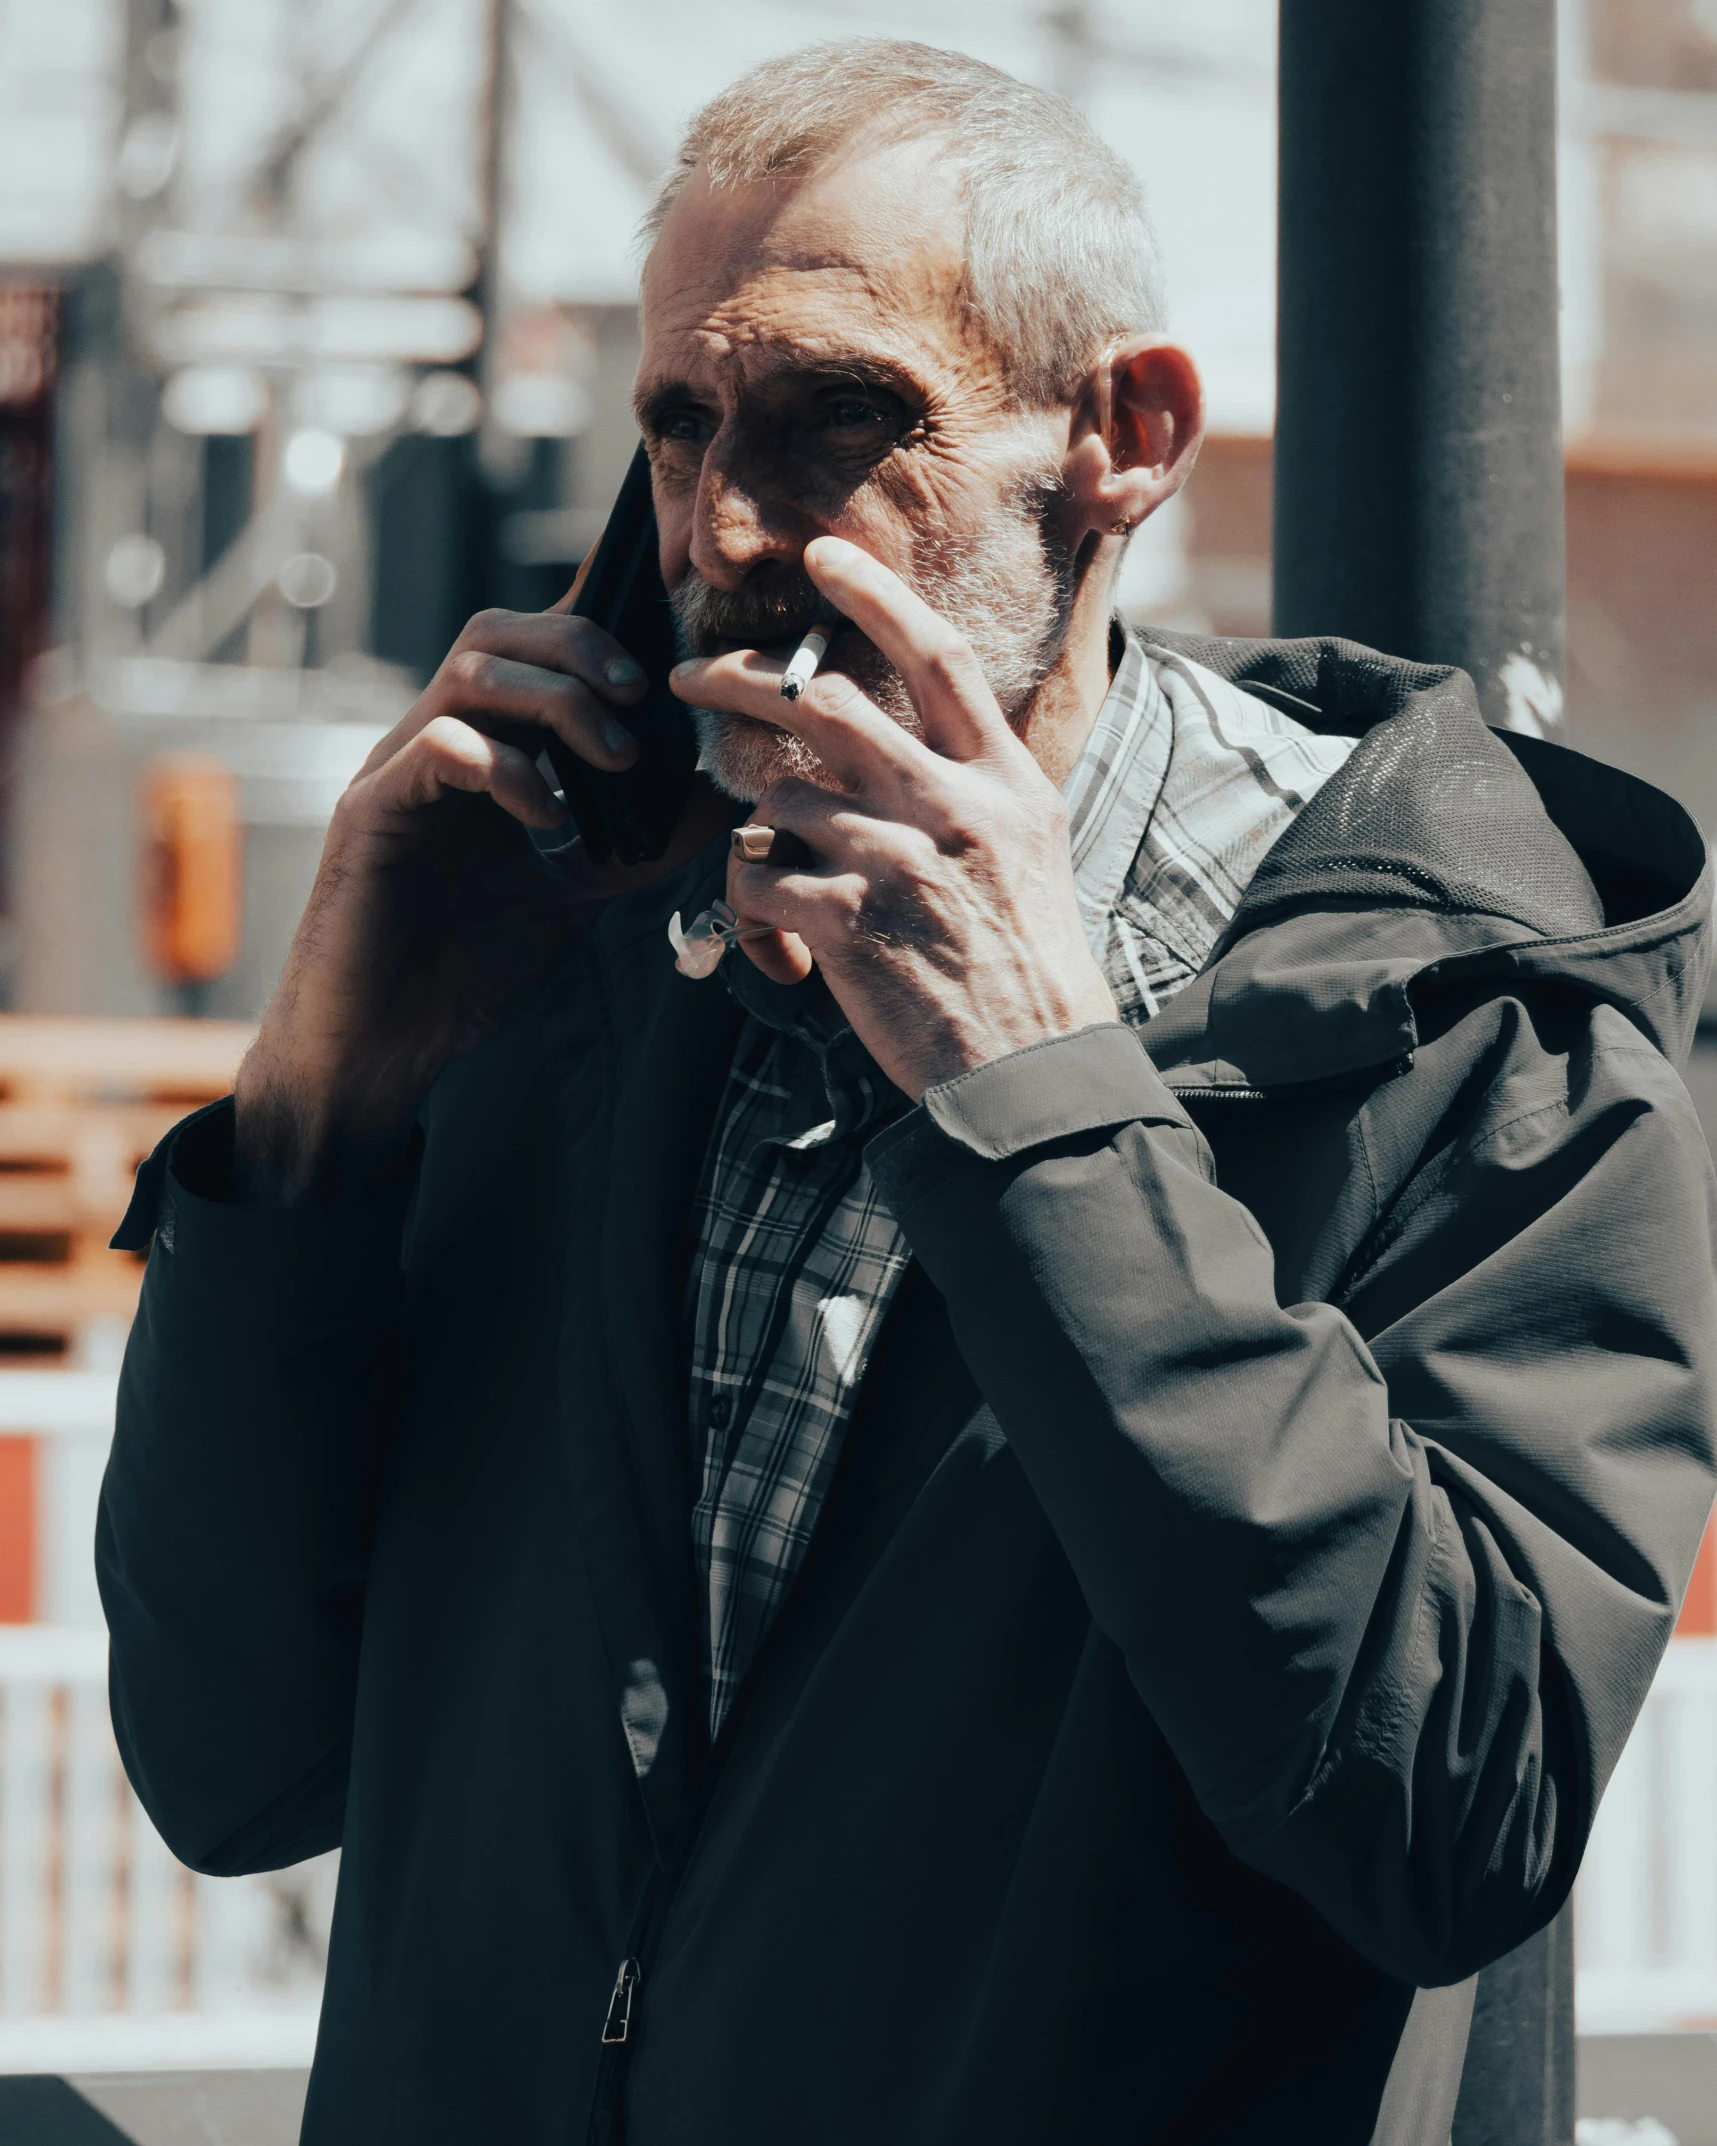 man smokes and talks on the phone